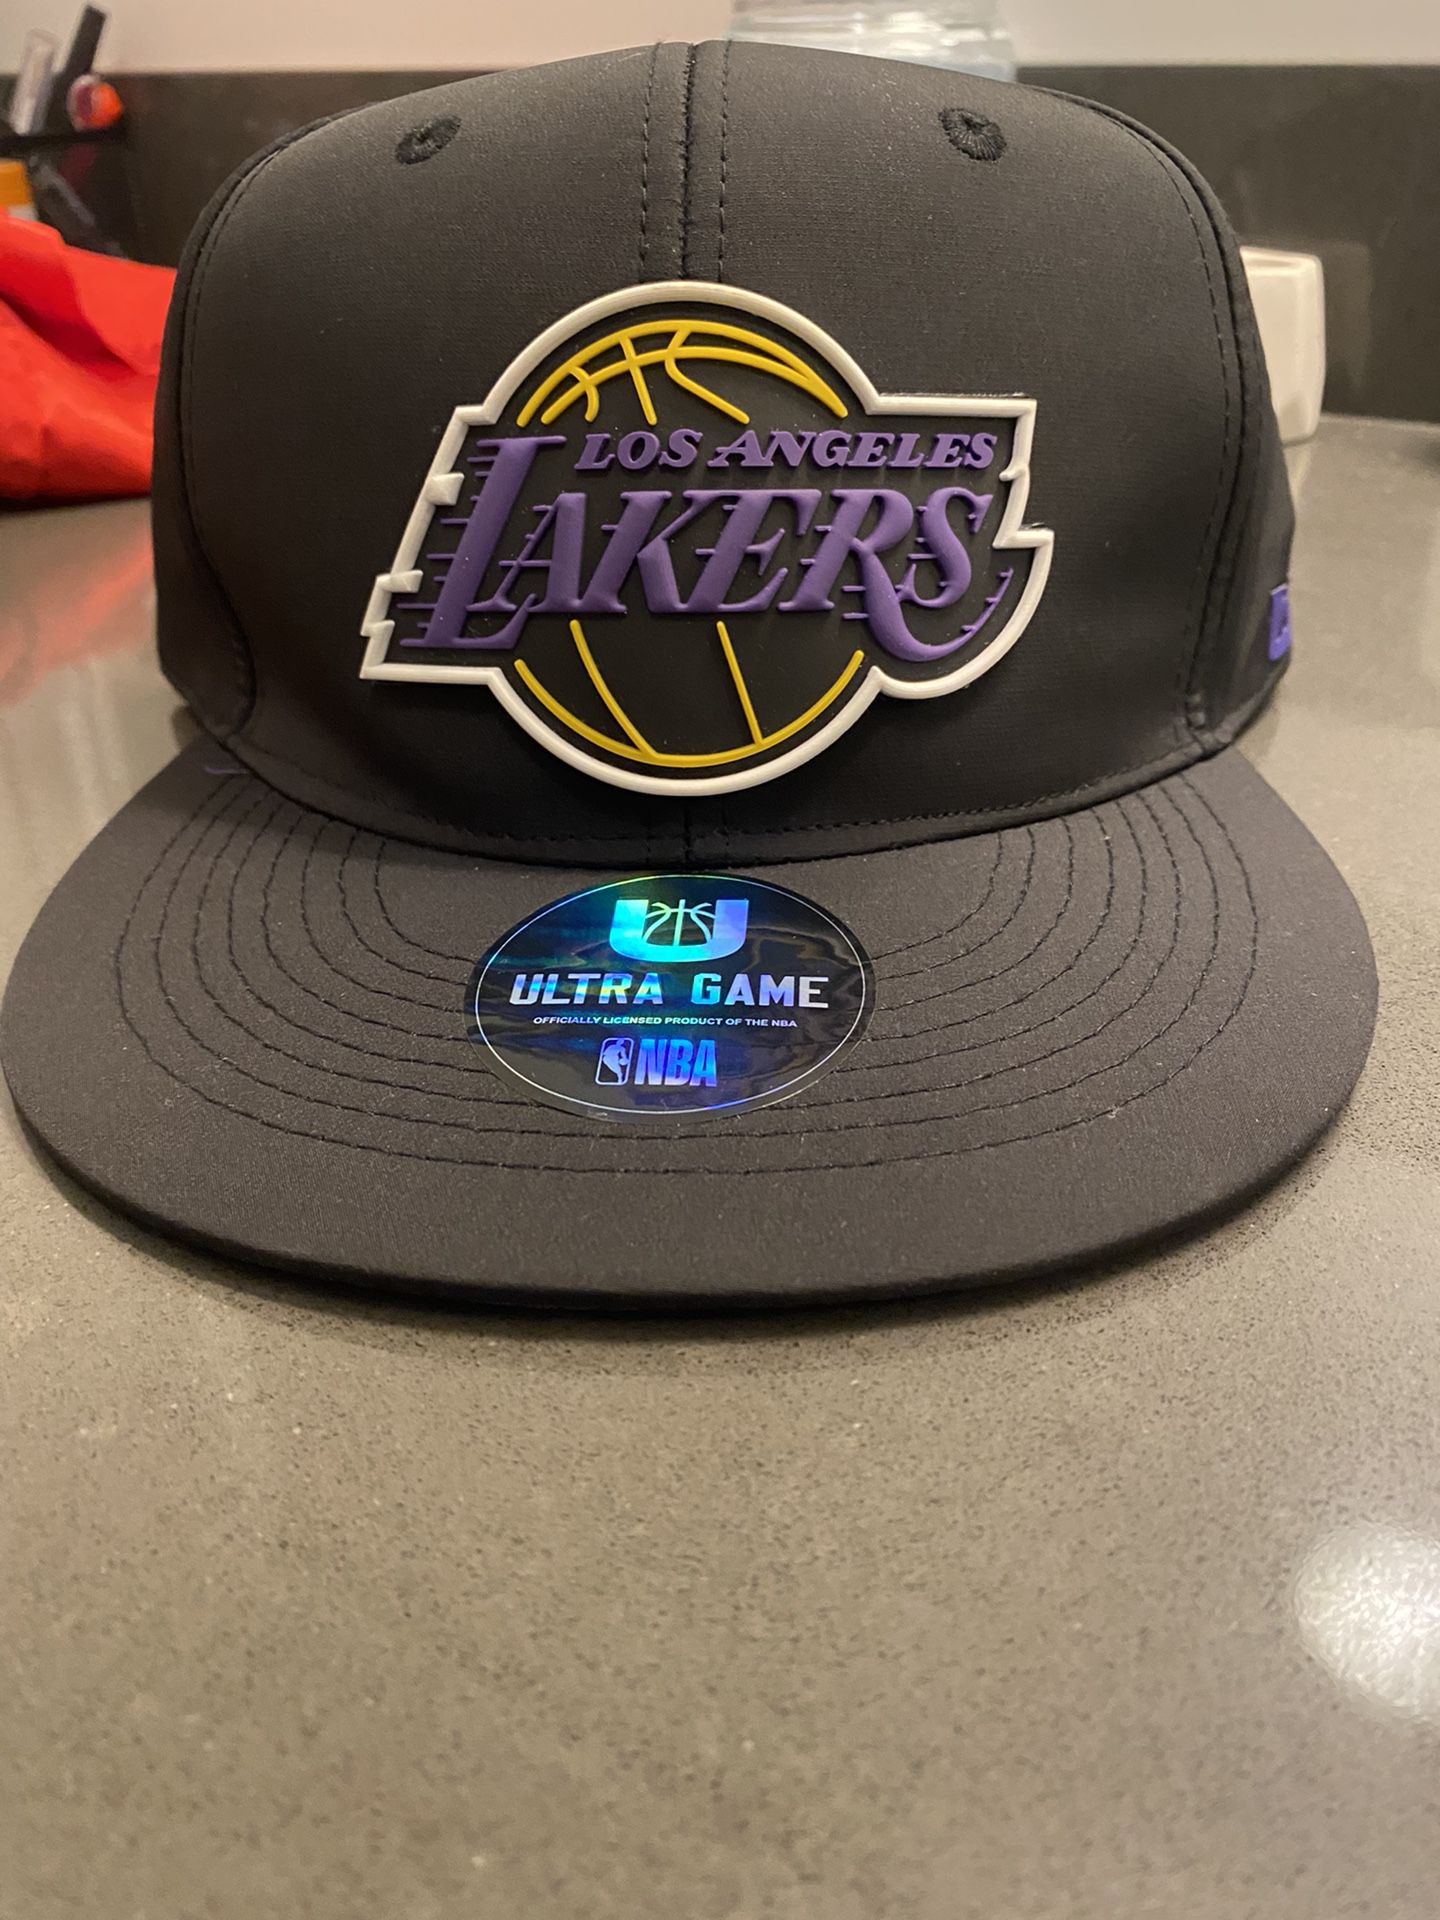  Ultra Game: Los Angeles Lakers